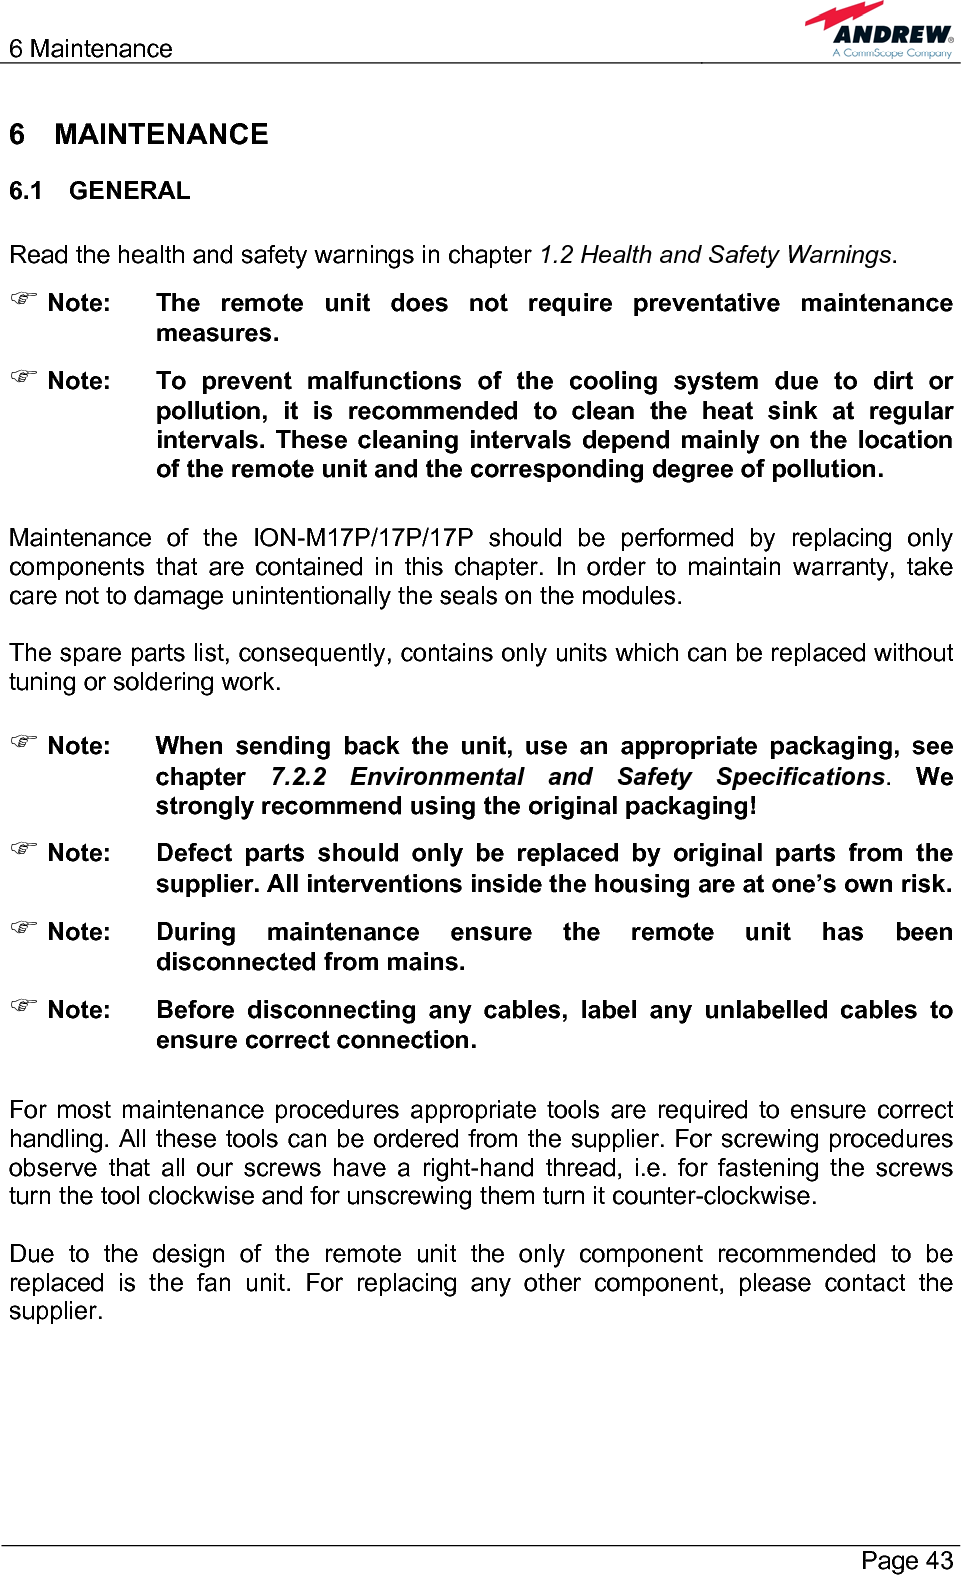 6 Maintenance       Page 43 6 MAINTENANCE 6.1 GENERAL  Read the health and safety warnings in chapter 1.2 Health and Safety Warnings. ) Note:  The remote unit does not require preventative maintenance measures. ) Note:  To prevent malfunctions of the cooling system due to dirt or pollution, it is recommended to clean the heat sink at regular intervals. These cleaning intervals depend mainly on the location of the remote unit and the corresponding degree of pollution.  Maintenance of the ION-M17P/17P/17P should be performed by replacing only components that are contained in this chapter. In order to maintain warranty, take care not to damage unintentionally the seals on the modules.  The spare parts list, consequently, contains only units which can be replaced without tuning or soldering work.  ) Note:  When sending back the unit, use an appropriate packaging, see chapter  7.2.2 Environmental and Safety Specifications. We strongly recommend using the original packaging! ) Note:  Defect parts should only be replaced by original parts from the supplier. All interventions inside the housing are at one’s own risk. ) Note:  During maintenance ensure the remote unit has been disconnected from mains. ) Note:  Before disconnecting any cables, label any unlabelled cables to ensure correct connection.  For most maintenance procedures appropriate tools are required to ensure correct handling. All these tools can be ordered from the supplier. For screwing procedures observe that all our screws have a right-hand thread, i.e. for fastening the screws turn the tool clockwise and for unscrewing them turn it counter-clockwise.  Due to the design of the remote unit the only component recommended to be replaced is the fan unit. For replacing any other component, please contact the supplier.  